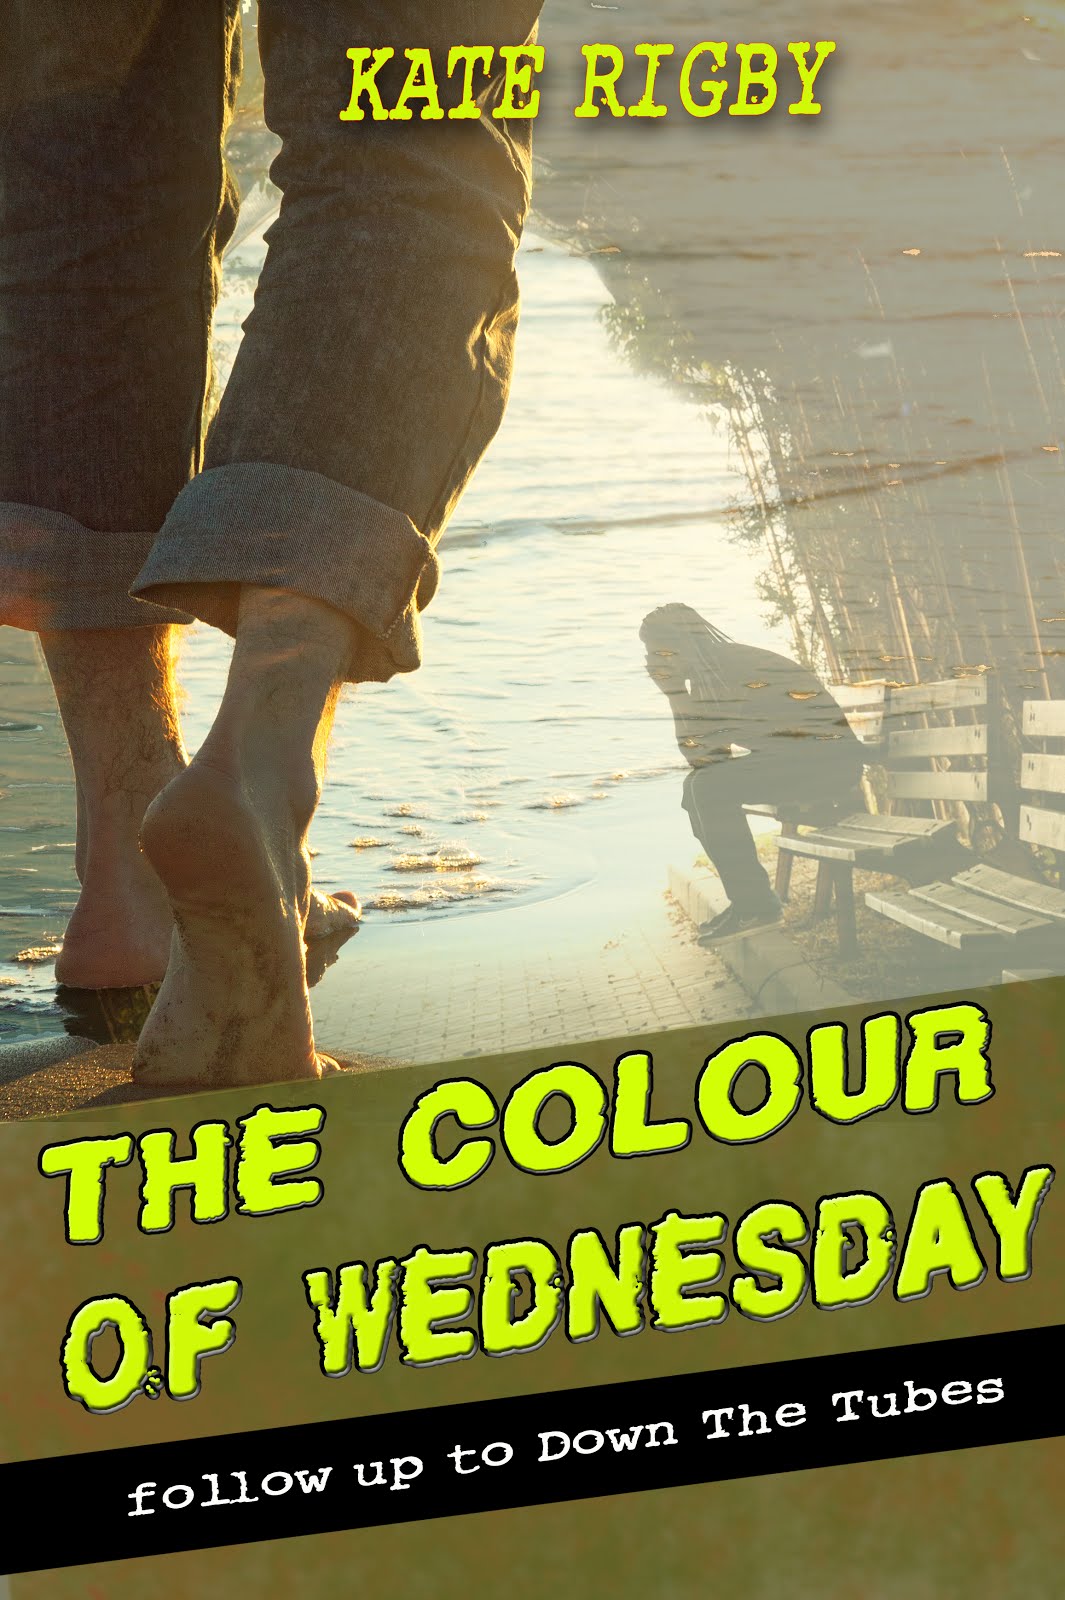 The Colour Of Wednesday